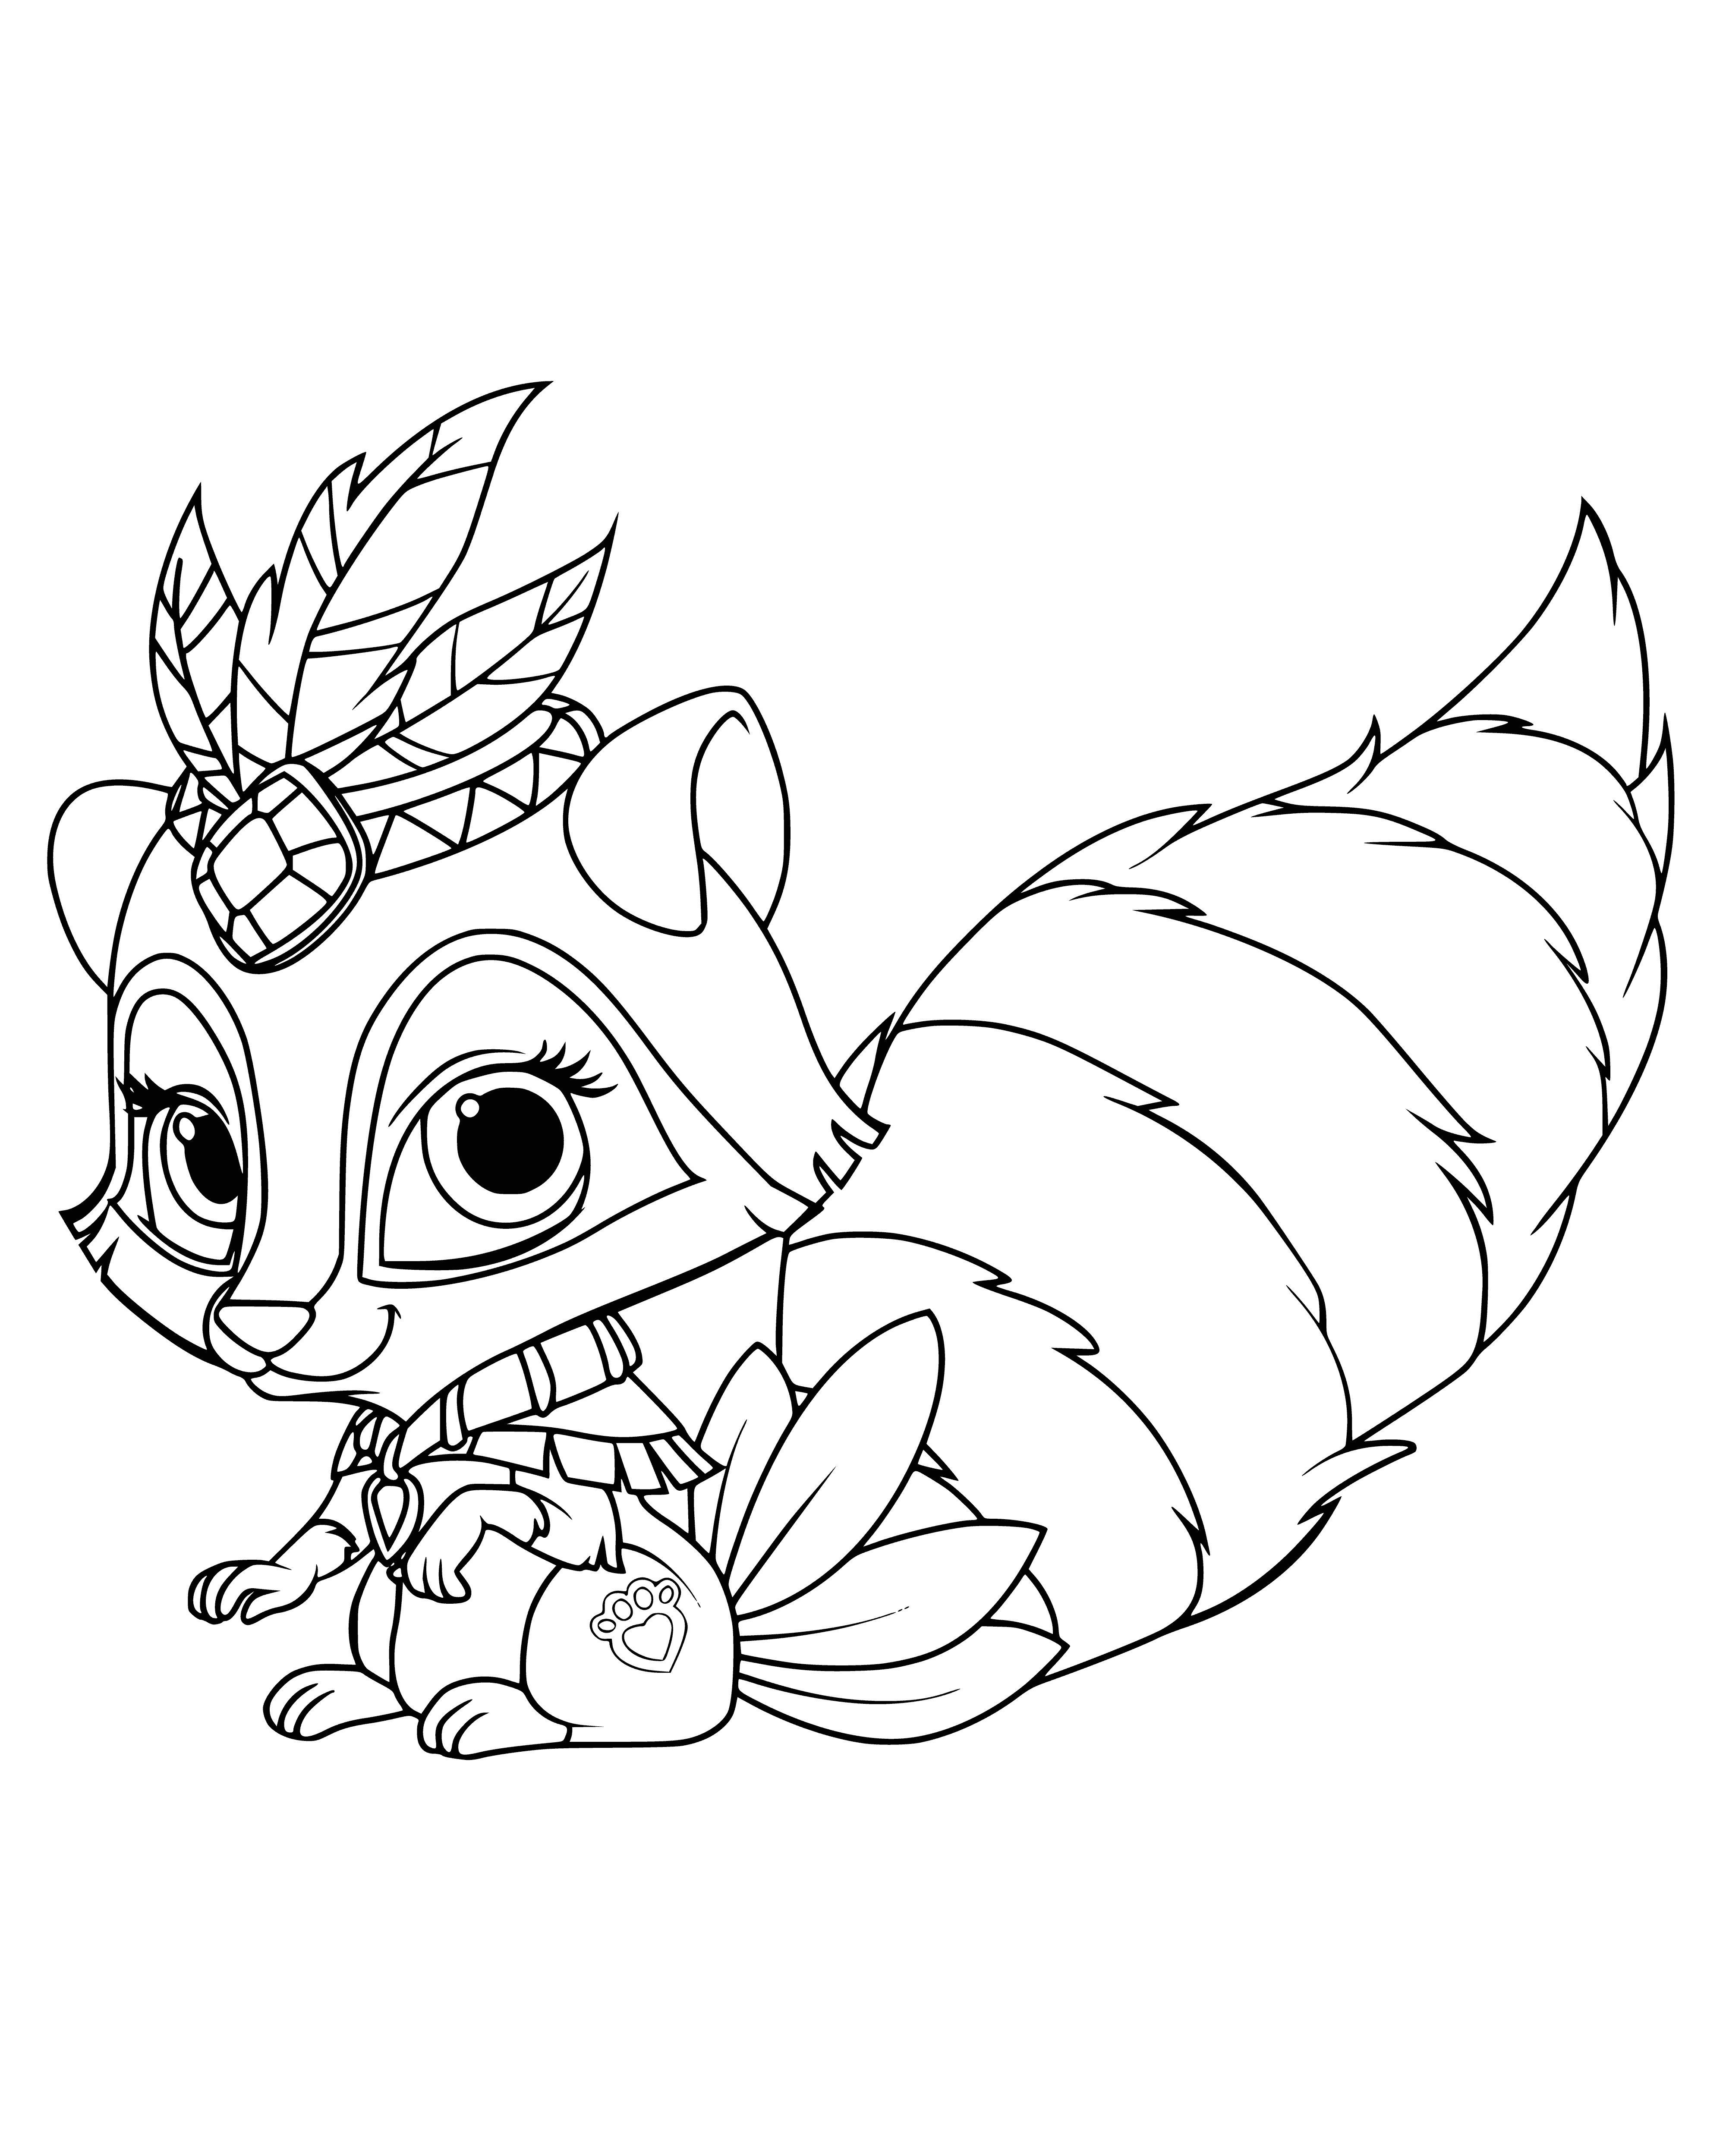 coloring page: Royal pets Basil the raccoon and Pakahontas the Labrador Retriever love to play and explore.